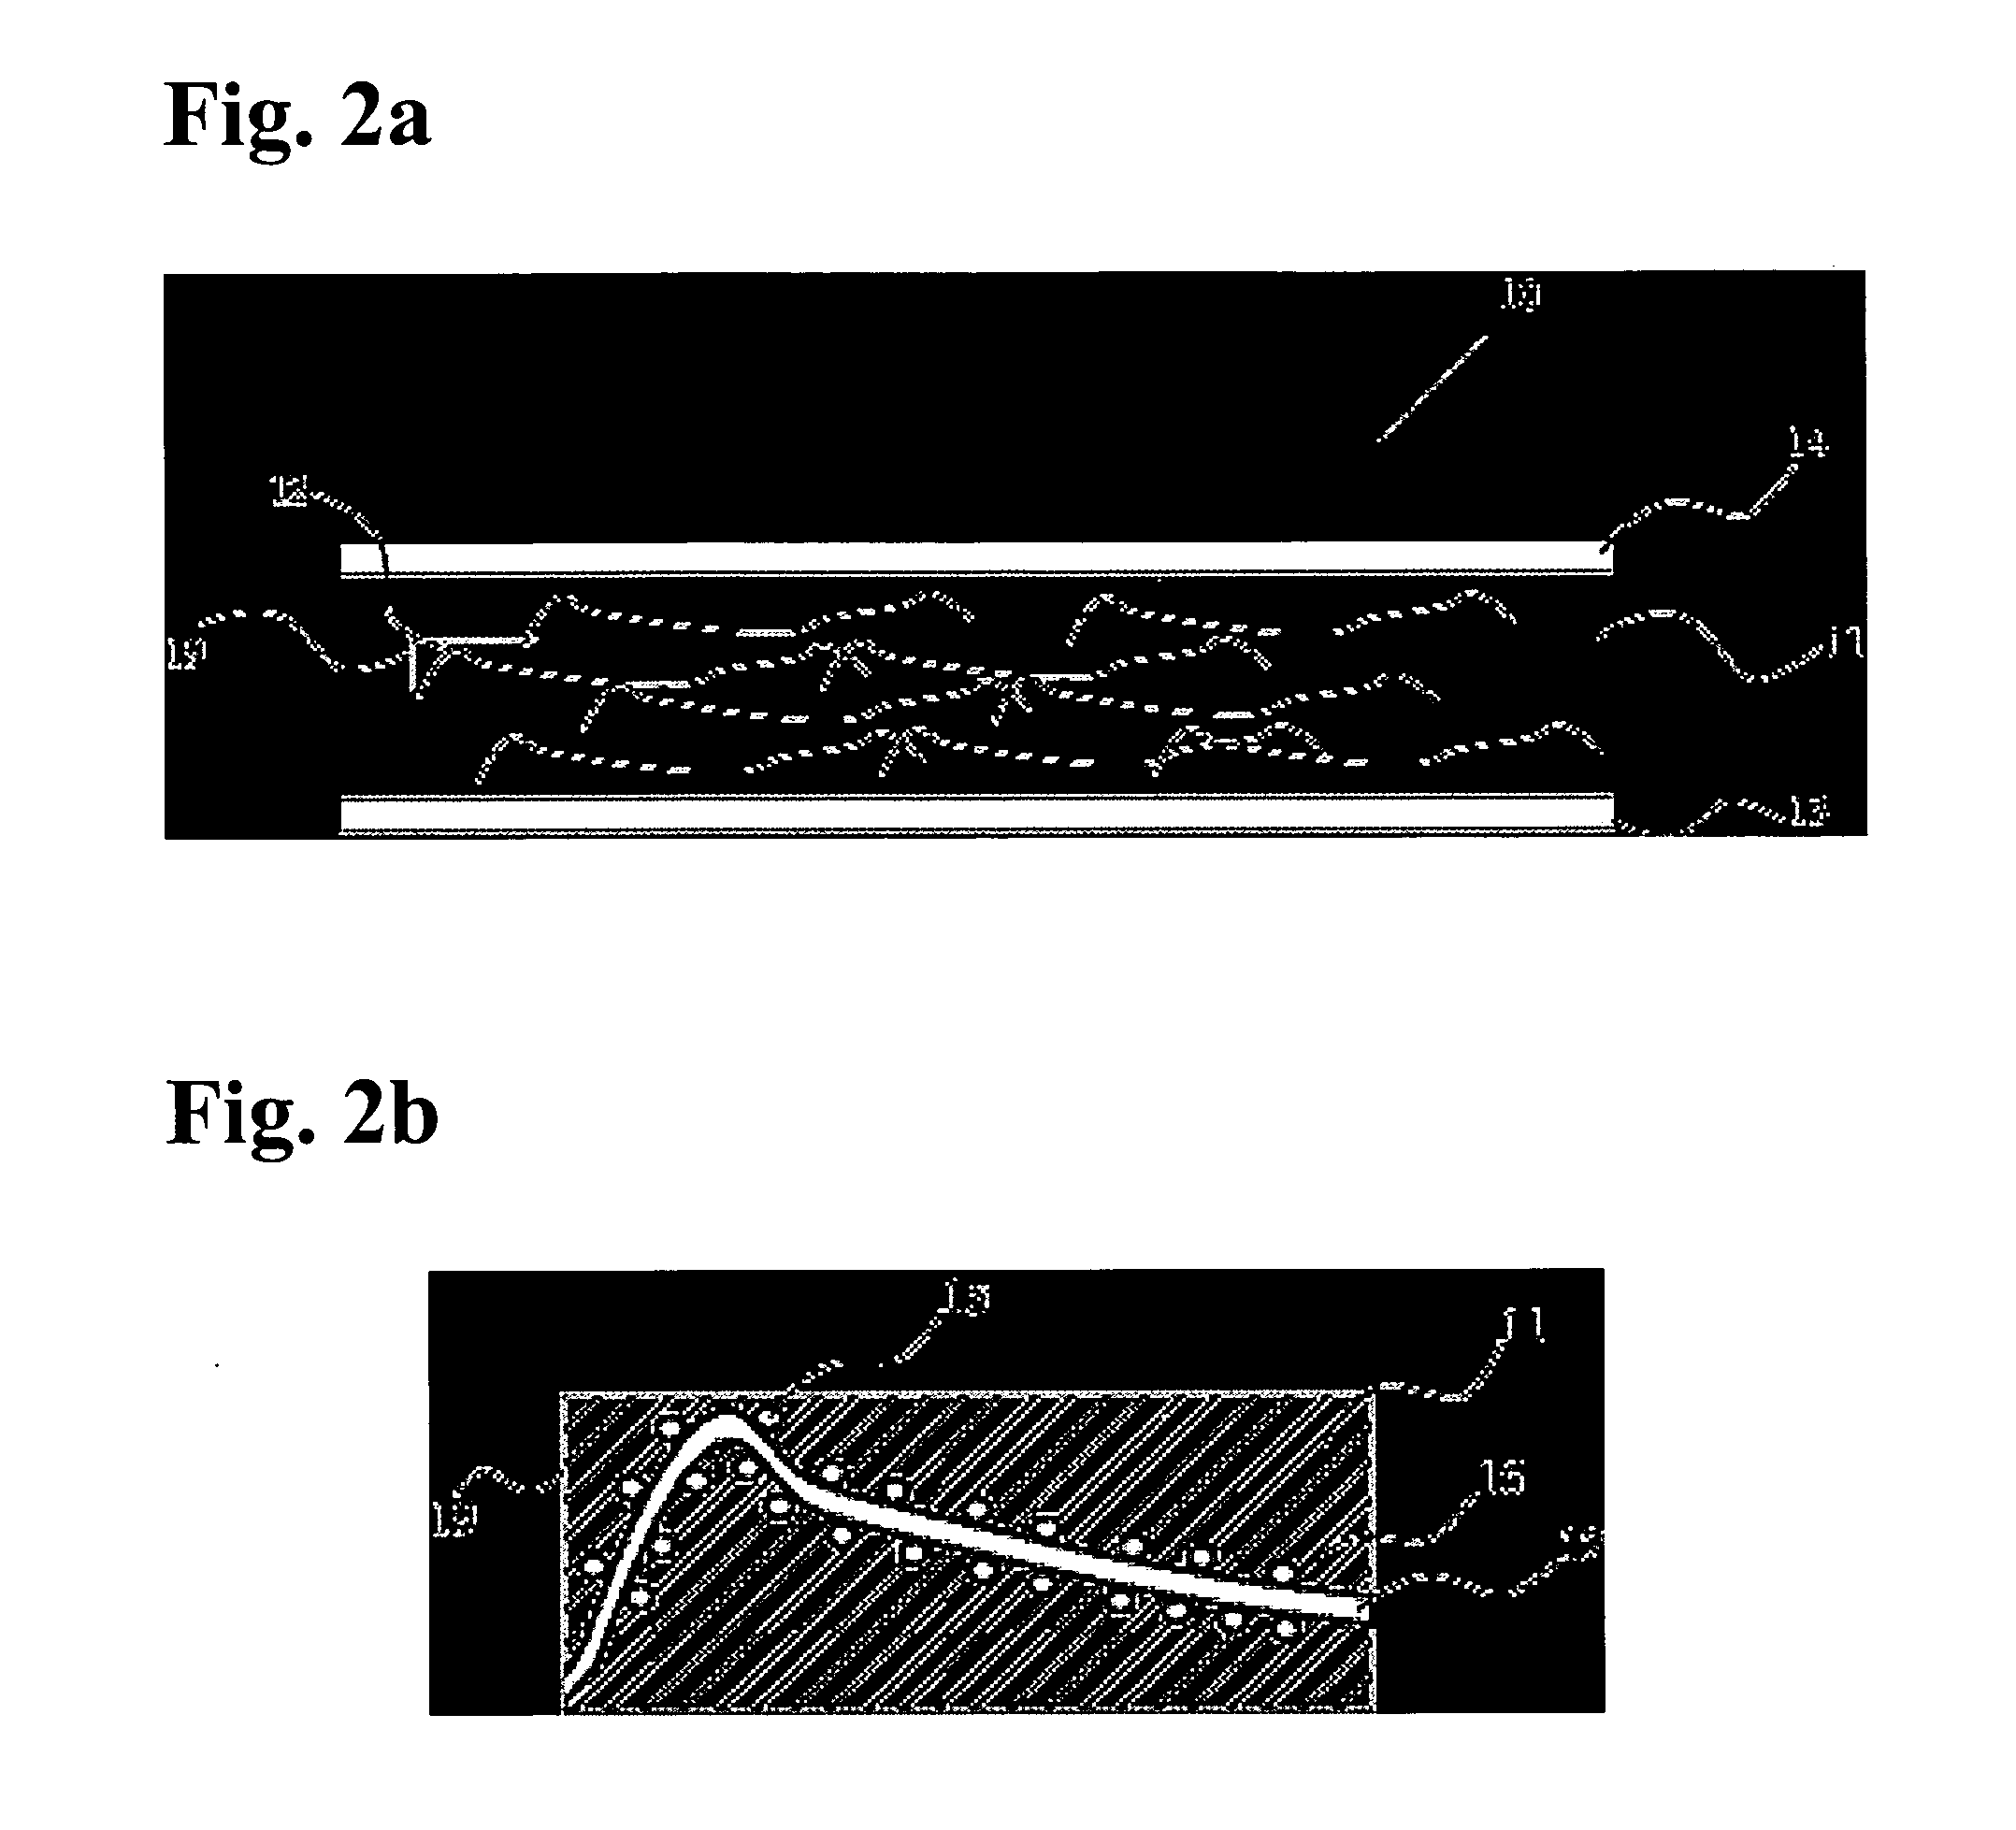 Glass fibers and mats having improved surface structures in gypsum boards